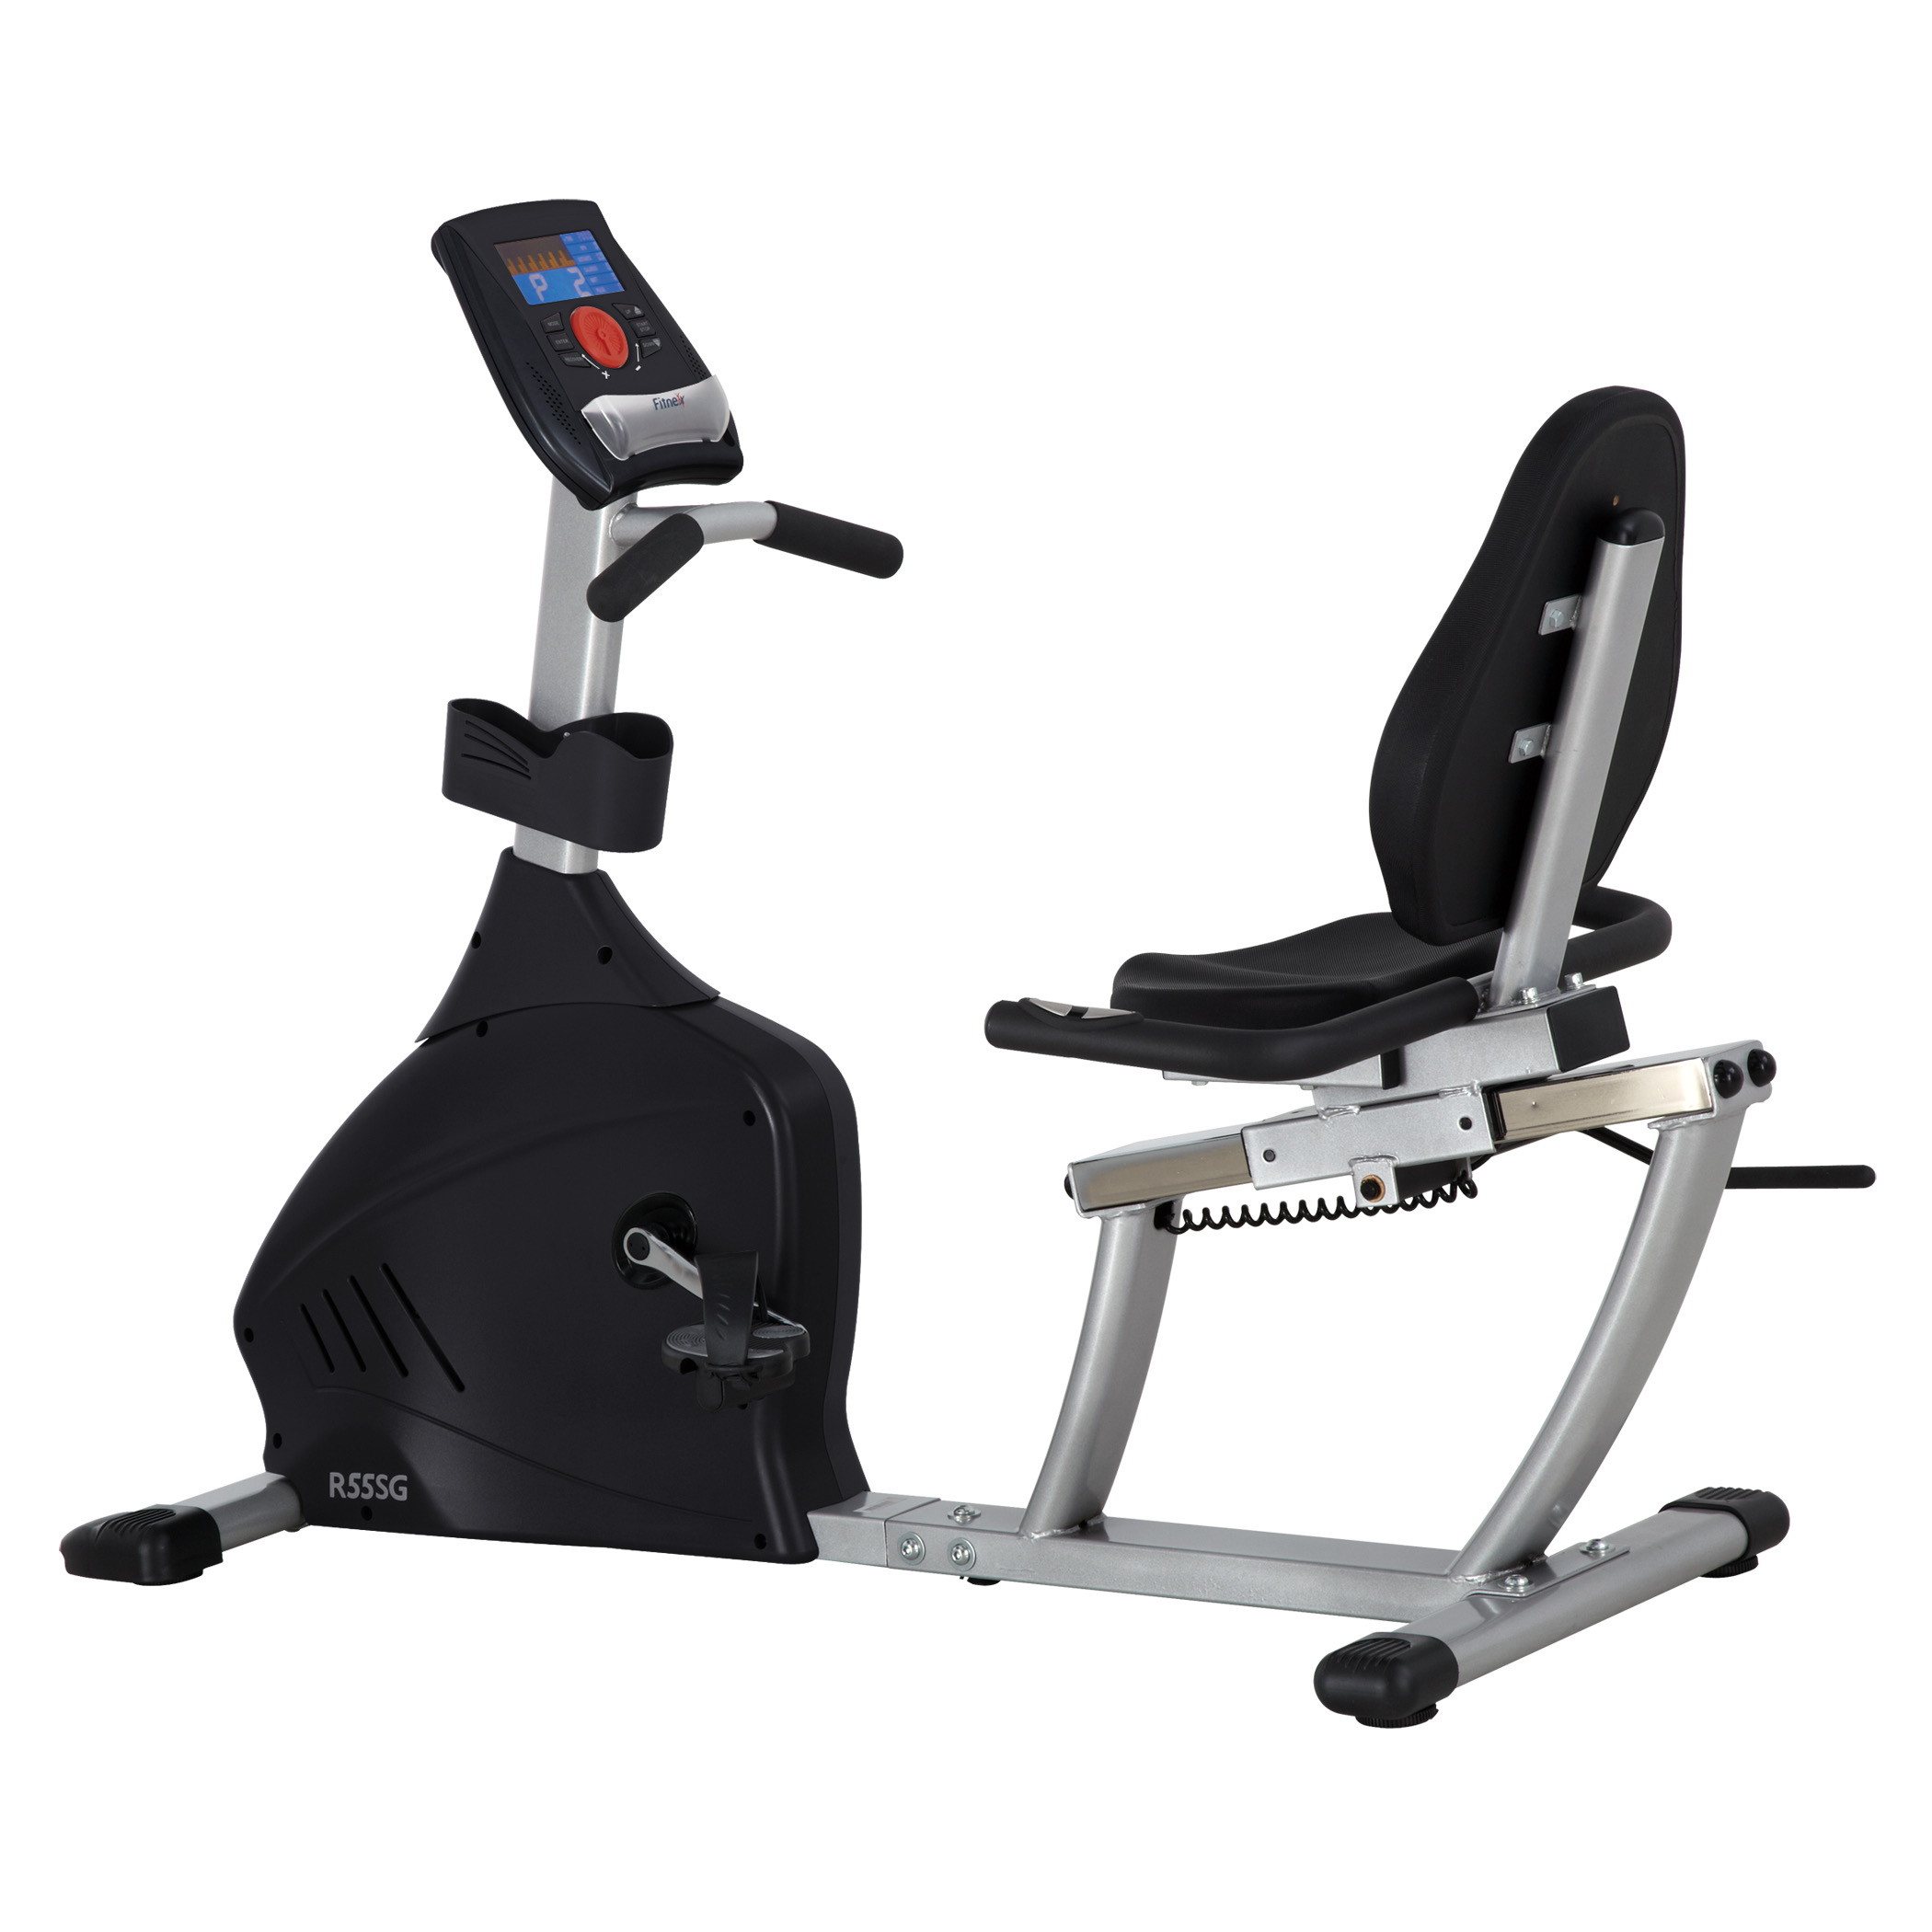 What Is The Number One Recumbent Bike